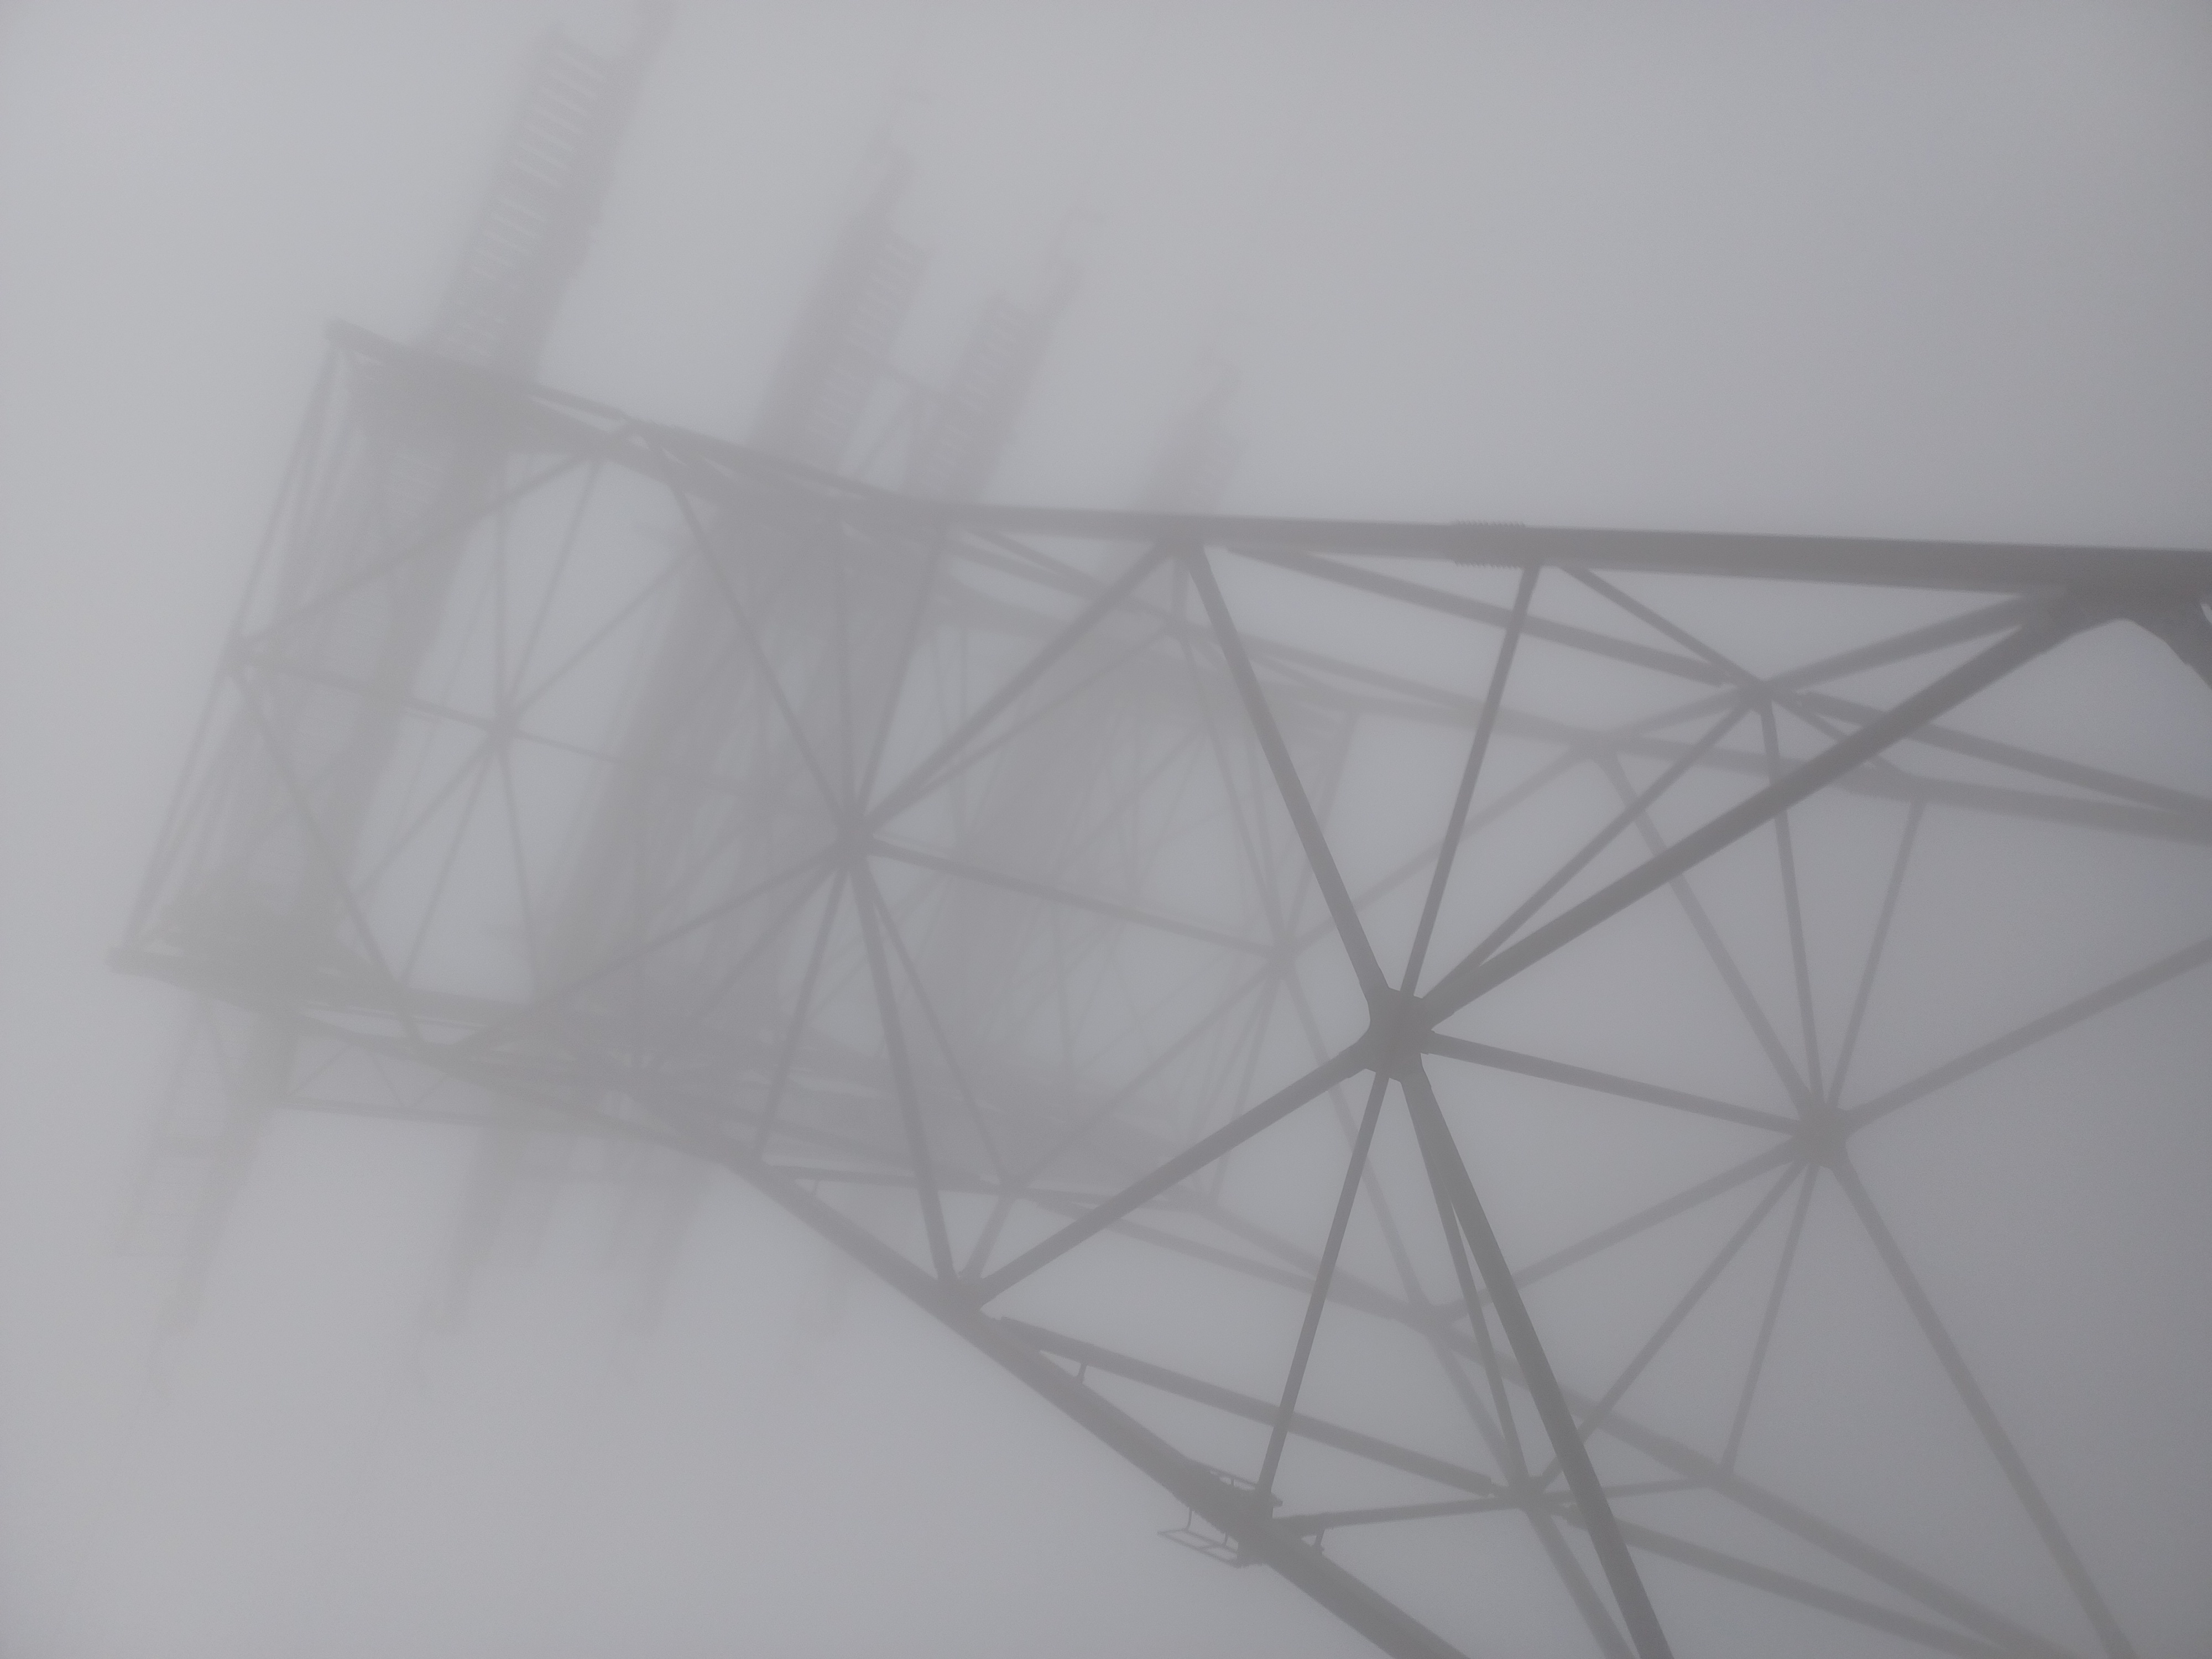 Cable-car tower in the mist